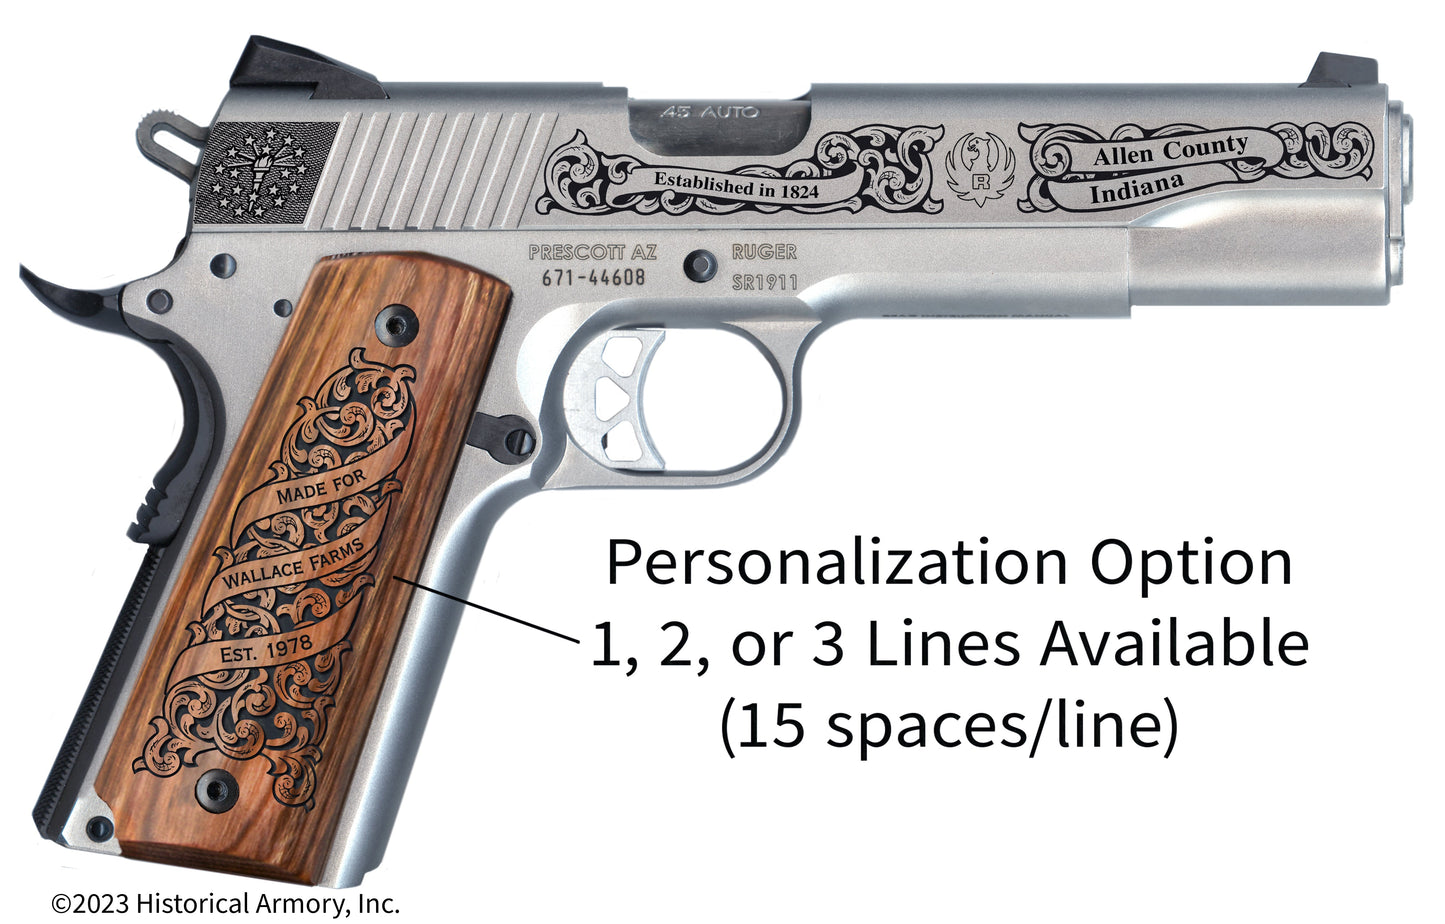 Allen County Indiana Personalized Engraved .45 Auto Ruger 1911